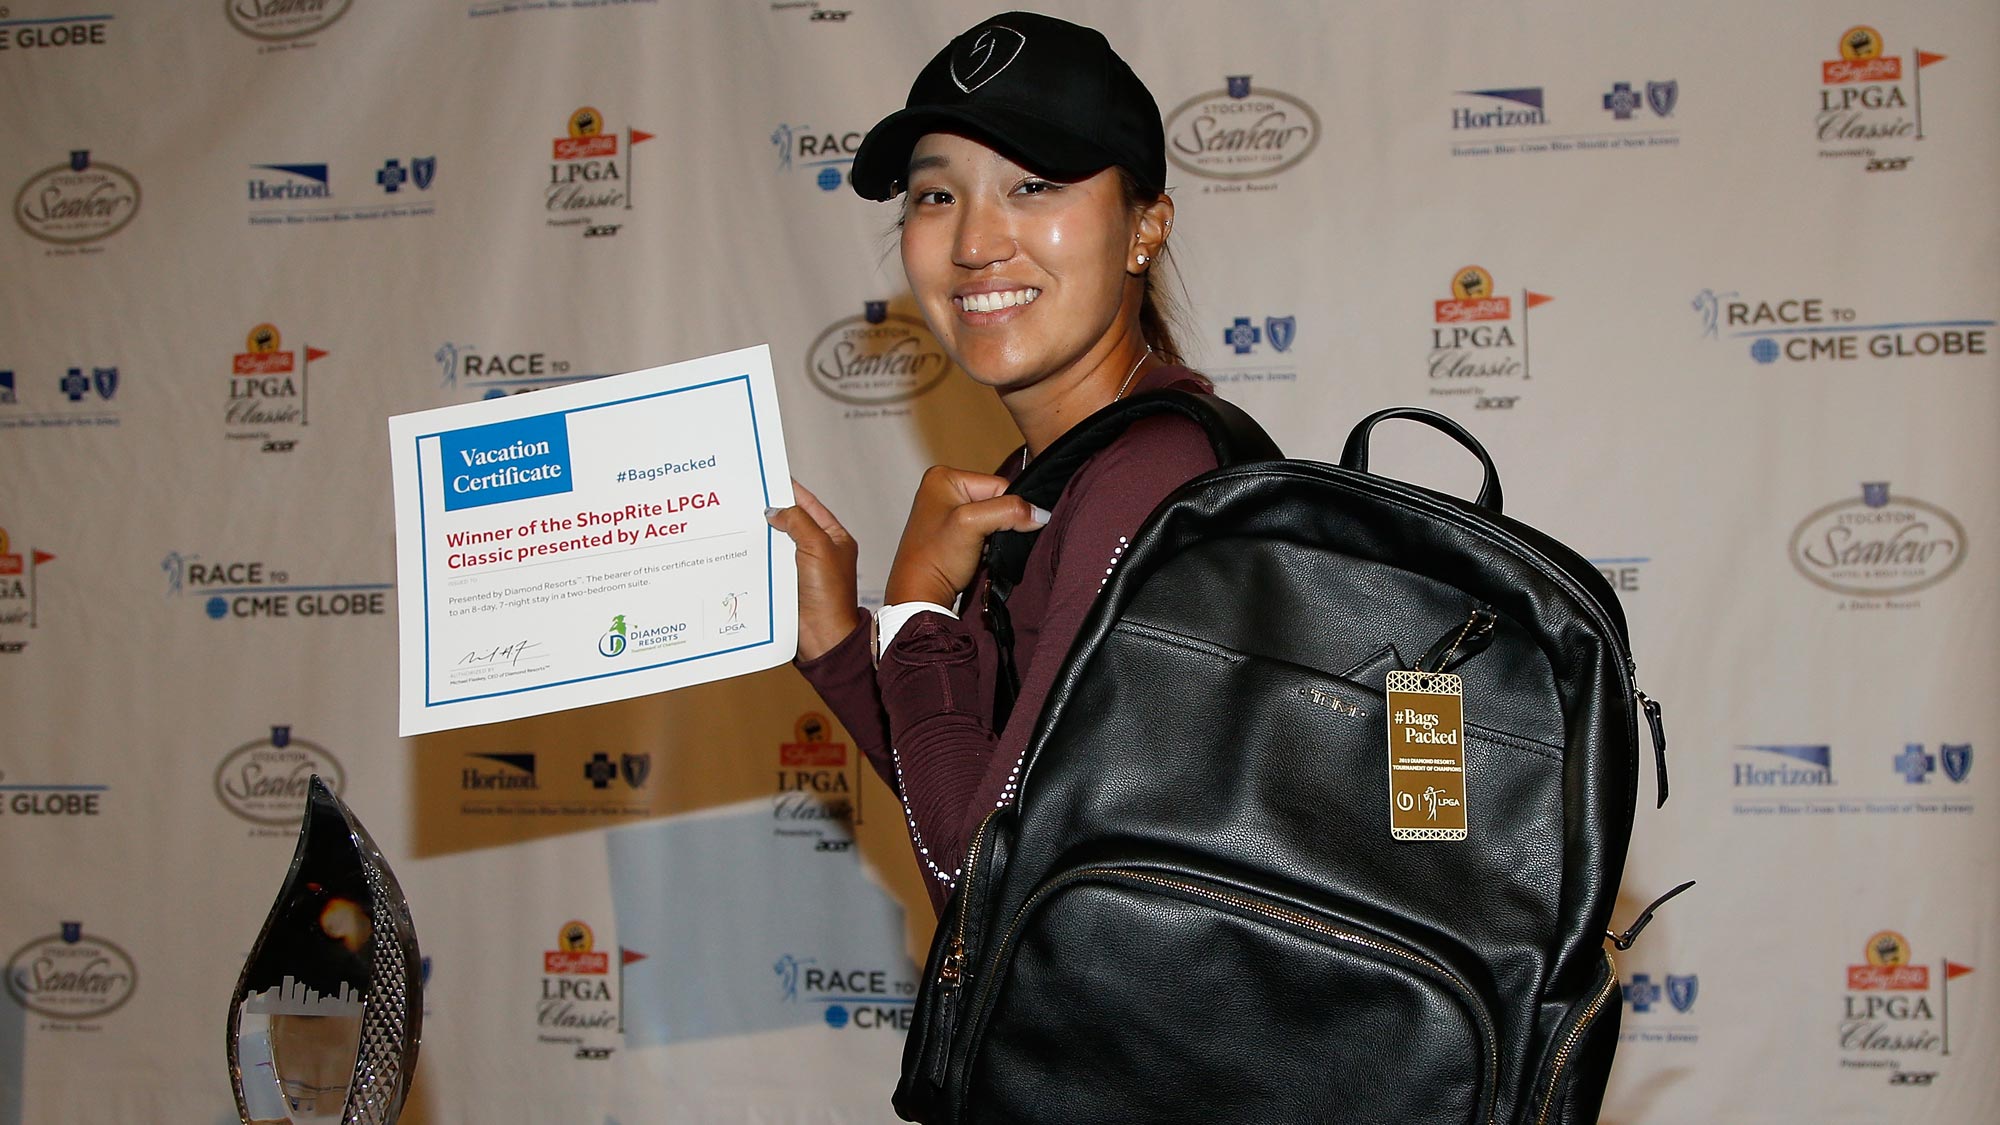 Annie Park has her #BagsPacked for the 2019 Diamond Resorts Tournament of Champions after her first career win at the ShopRite LPGA Classic presented by Acer